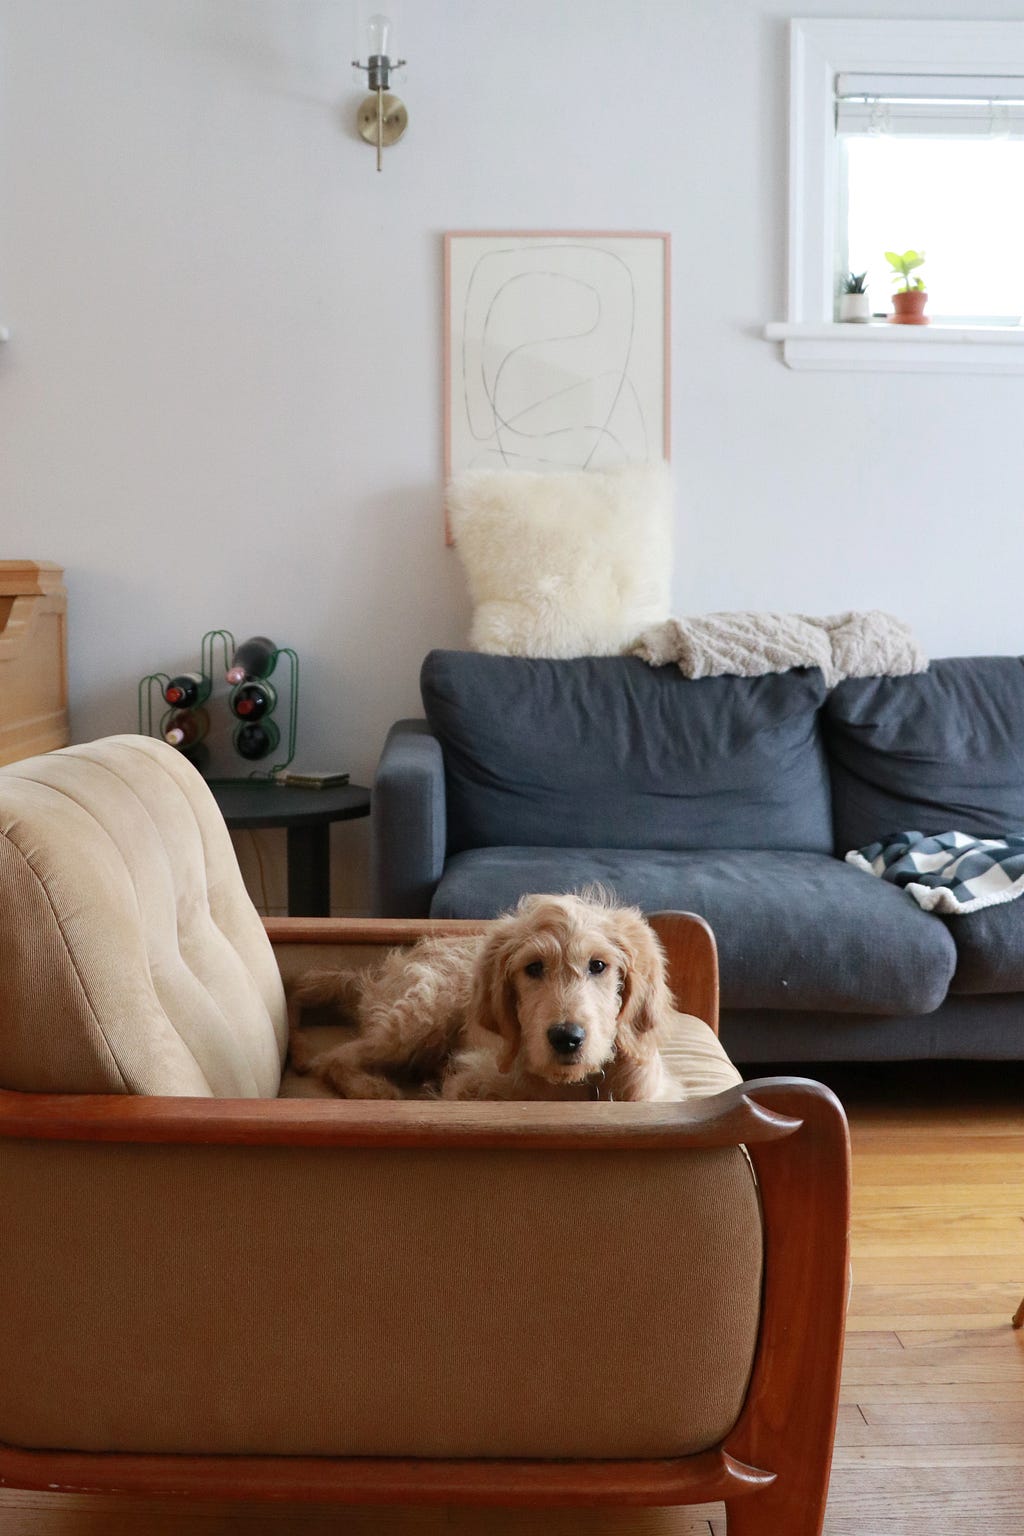 A goldendoodle puppy lying on an armchair, looking straight ahead with a grey sofa in the background.